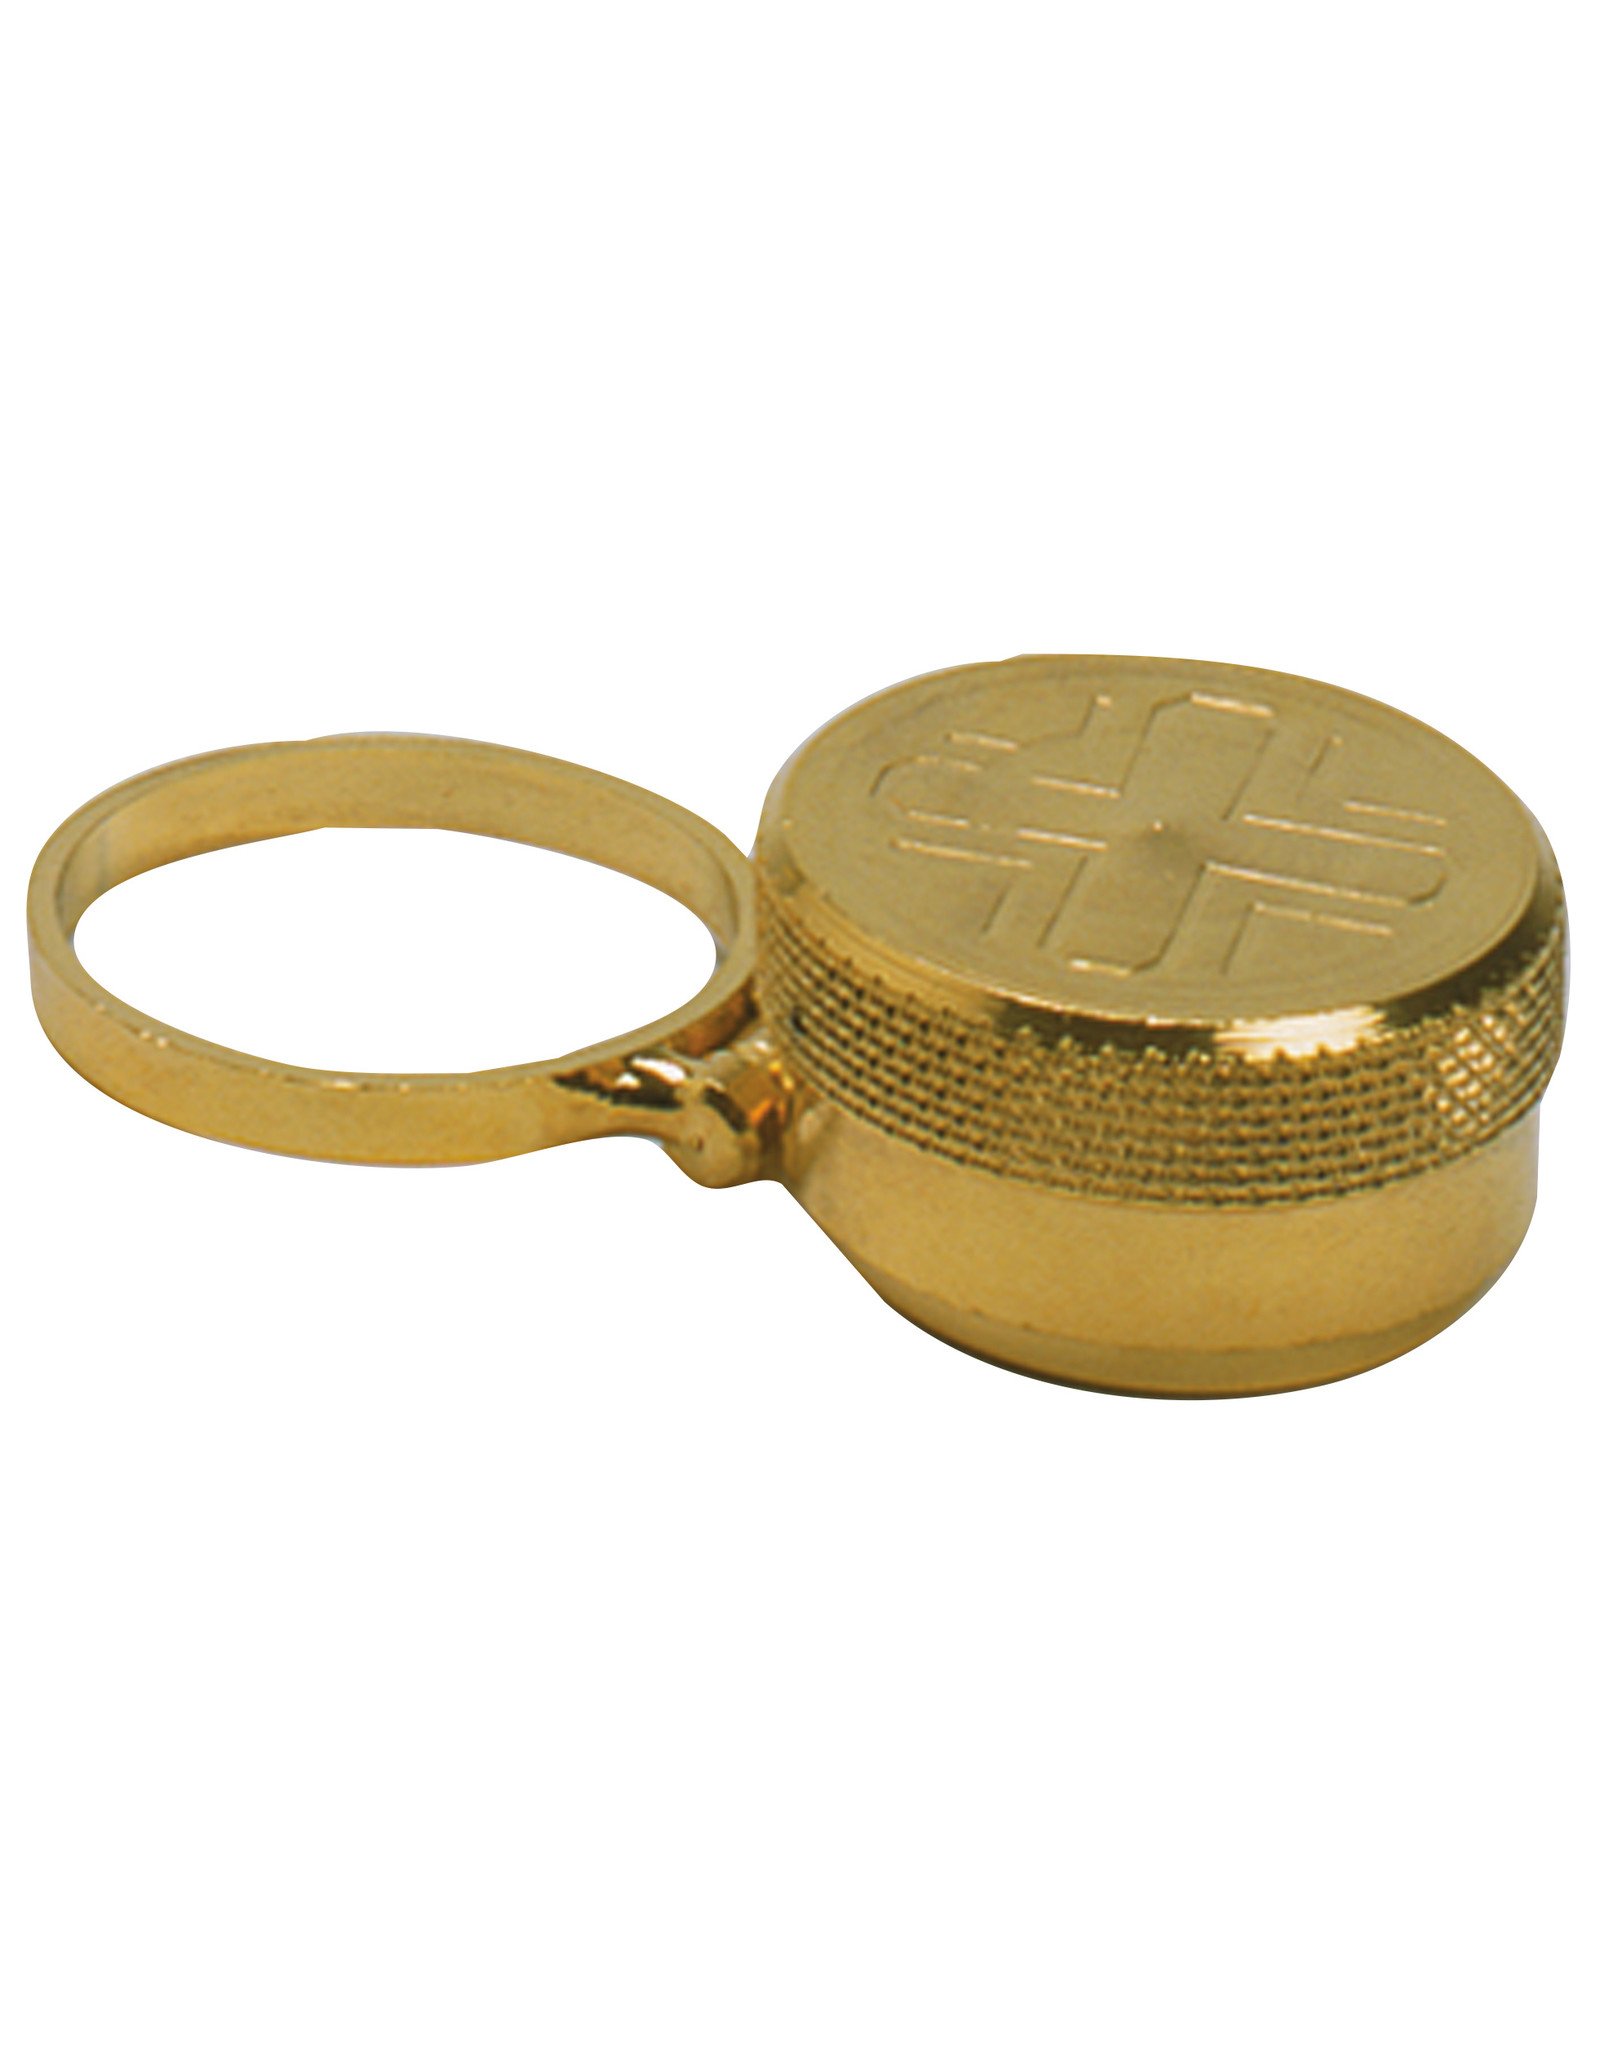 Oil Stock with Ring - Mini - 24kt Gold Plated